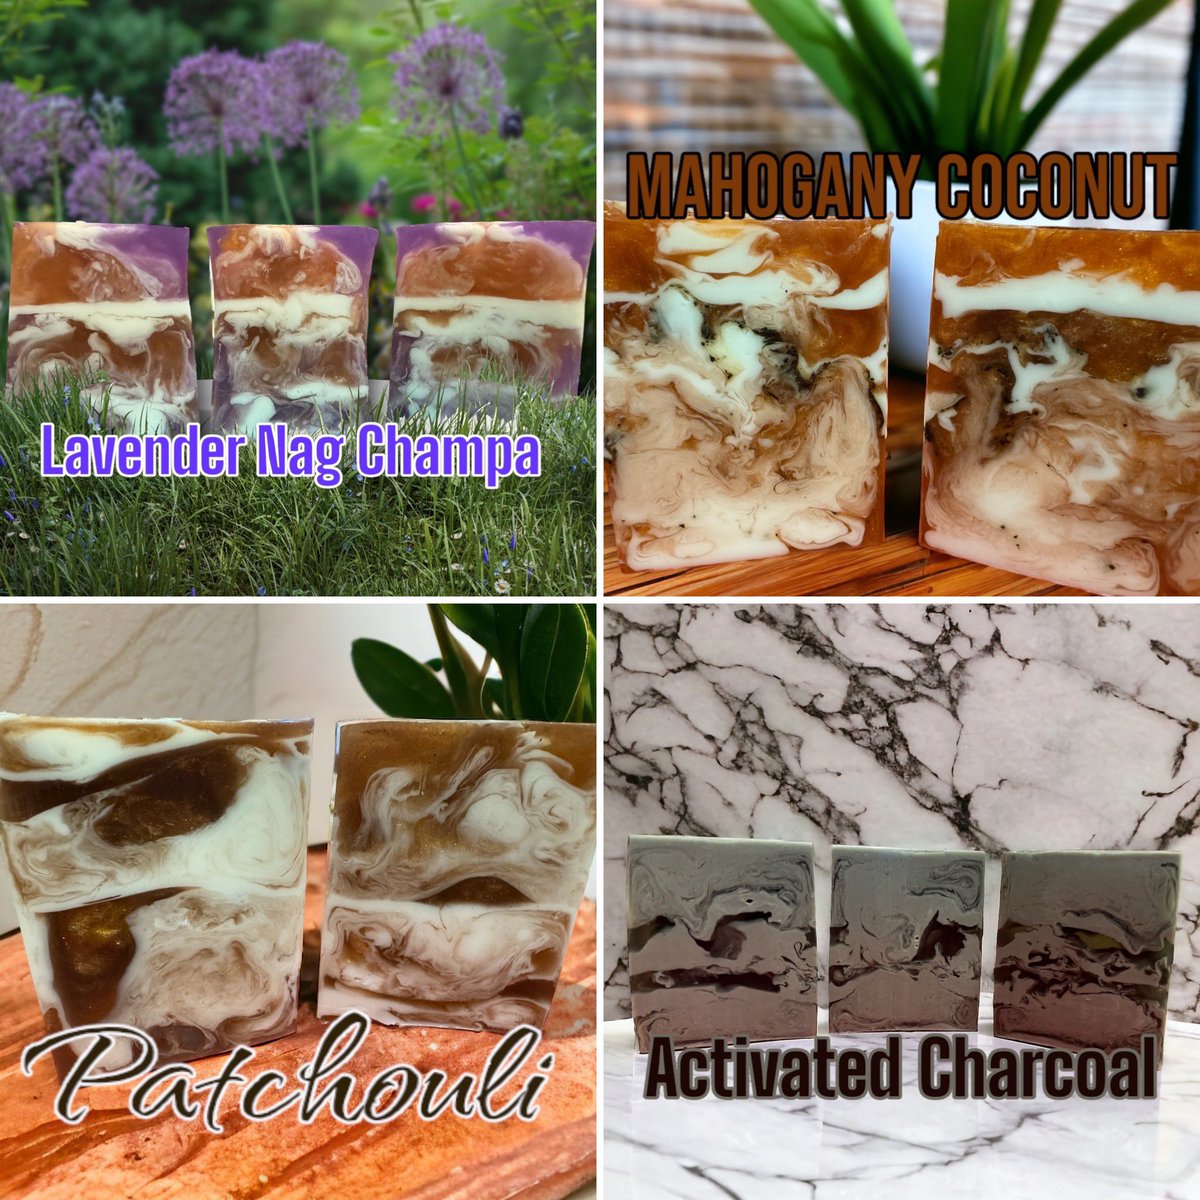 These beautiful handcrafted soaps are available over in my Facebook shop, Purple Dragonfly Soaps n Suds!!

They smell amazing and are only $9.00 plus shipping! I ship anywhere in the United States 💜💜💜

#gotsoap
#Handcrafted 
#meltandpour
#supportsmallbiz